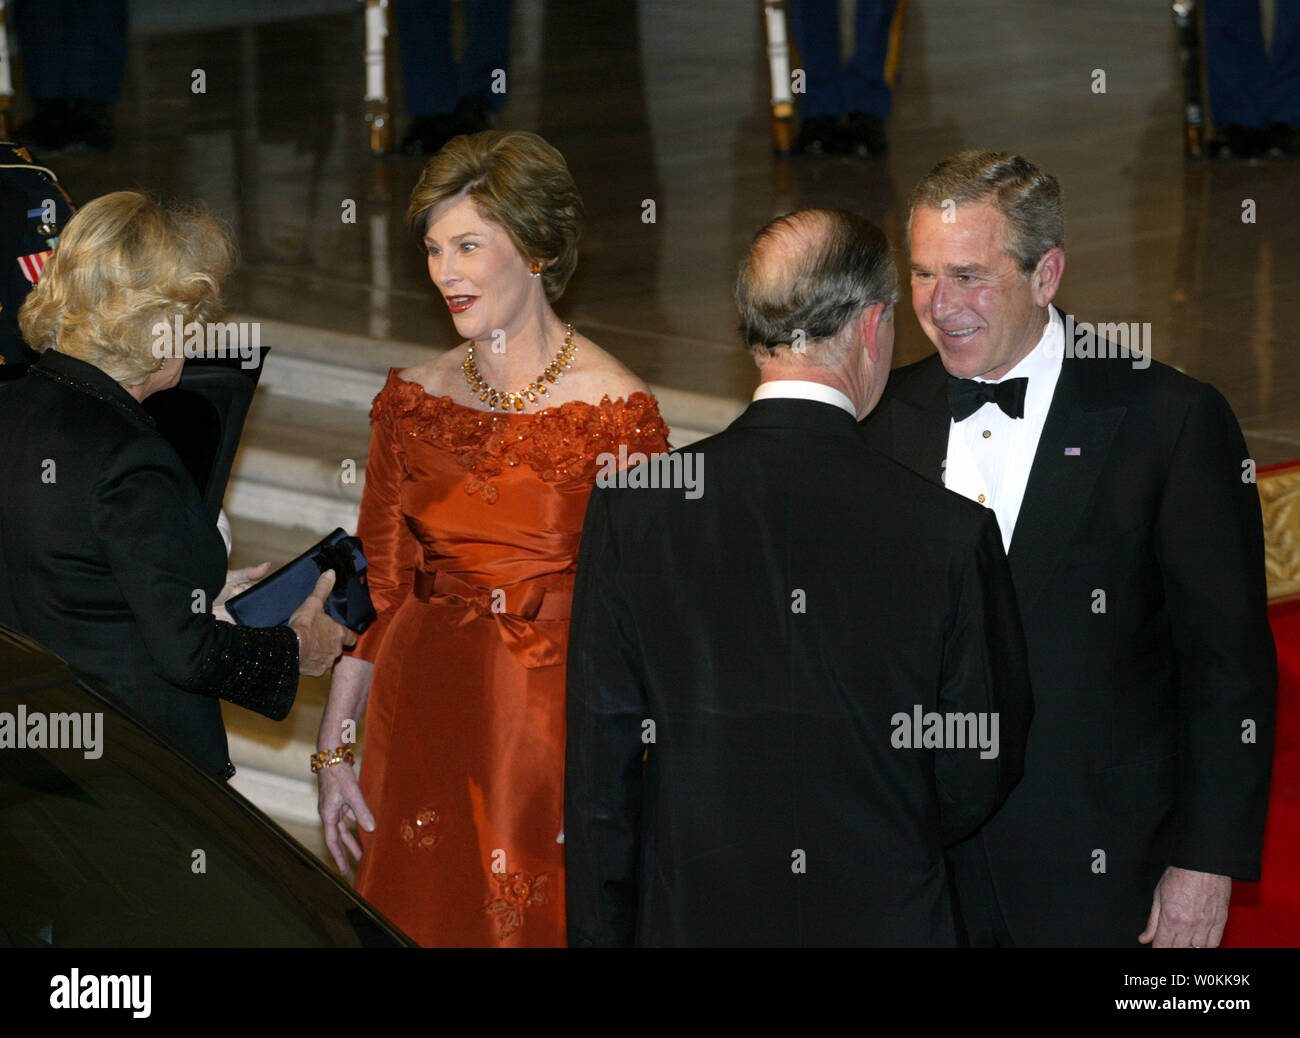 U.S. President George W. Bush (R) and first lady Laura Bush greet Britain's Prince Charles and his wife Camilla, Duchess of Cornwall, before a dinner at the White House in Washington, November 2, 2005. (UPI Photo/Yuri Gripas) Stock Photo